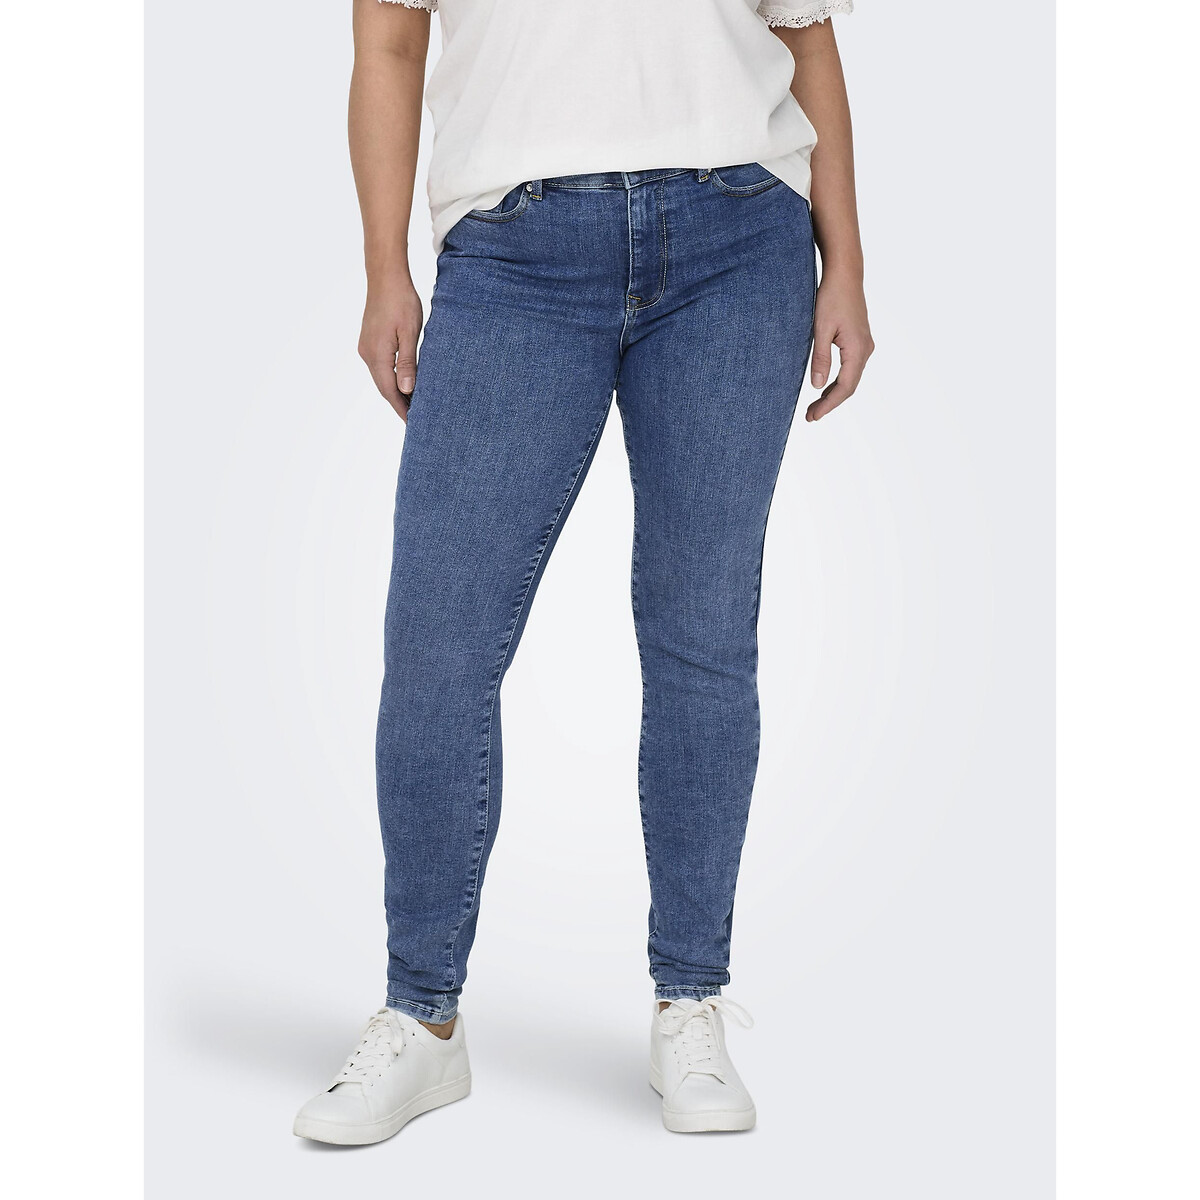 Pushup Skinny Jeans in Mid Rise